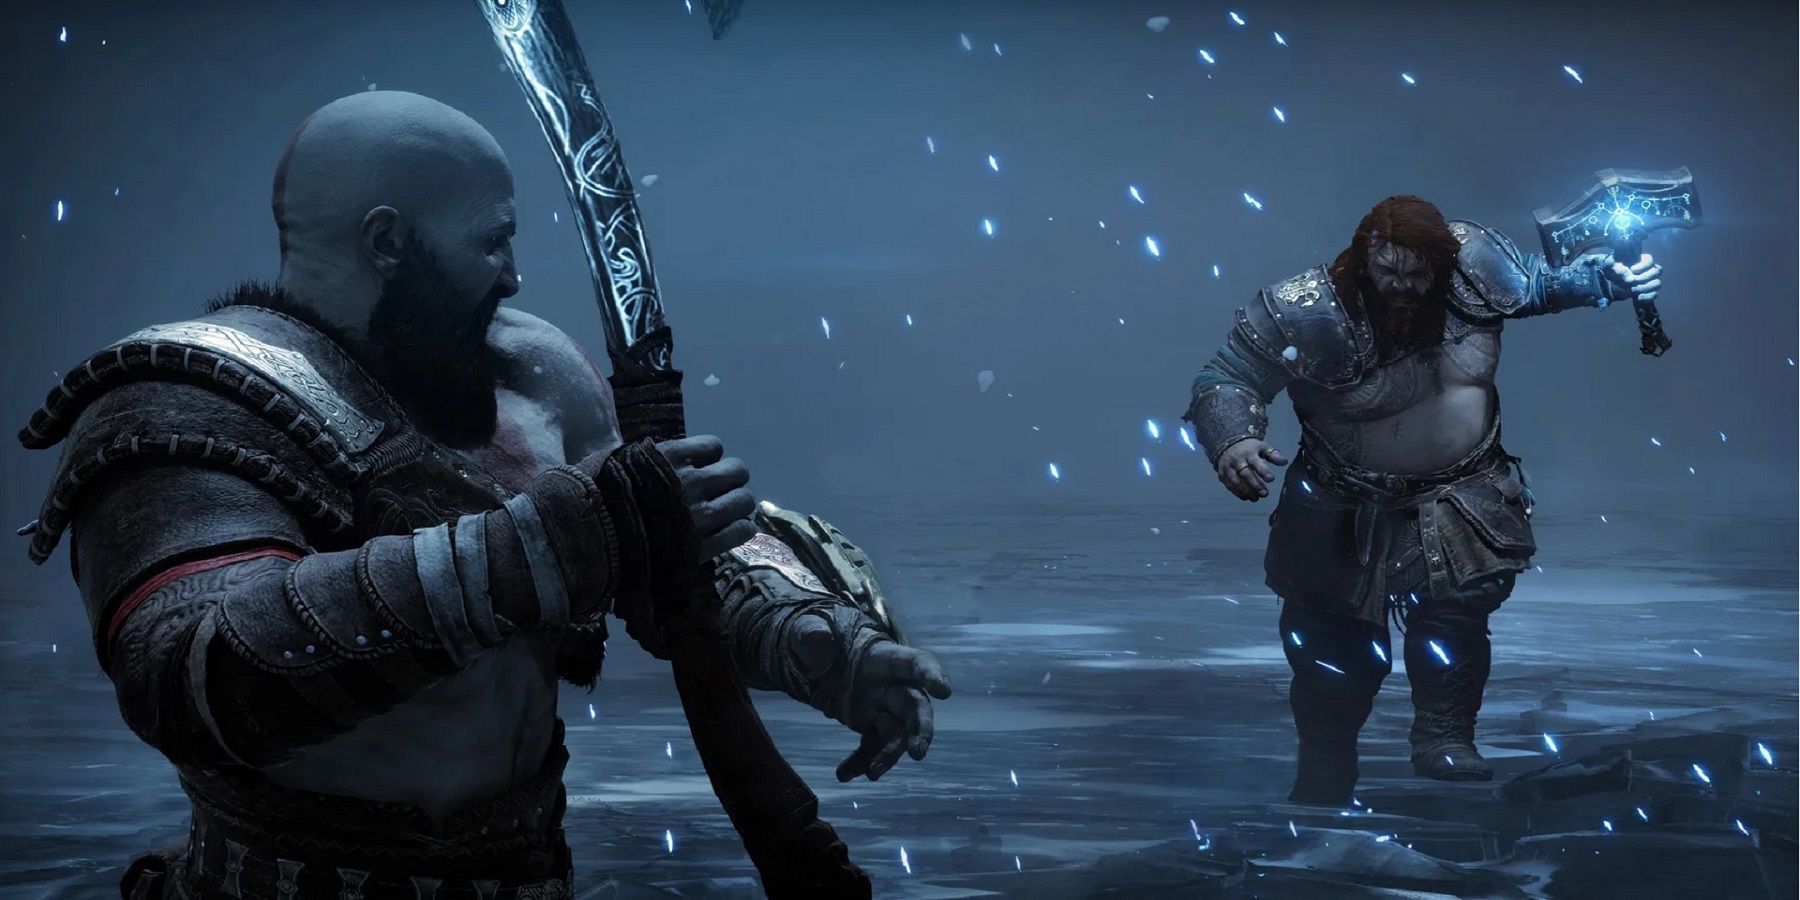 Do you think kratos was holding back during his first fight with Thor  because later he wins.